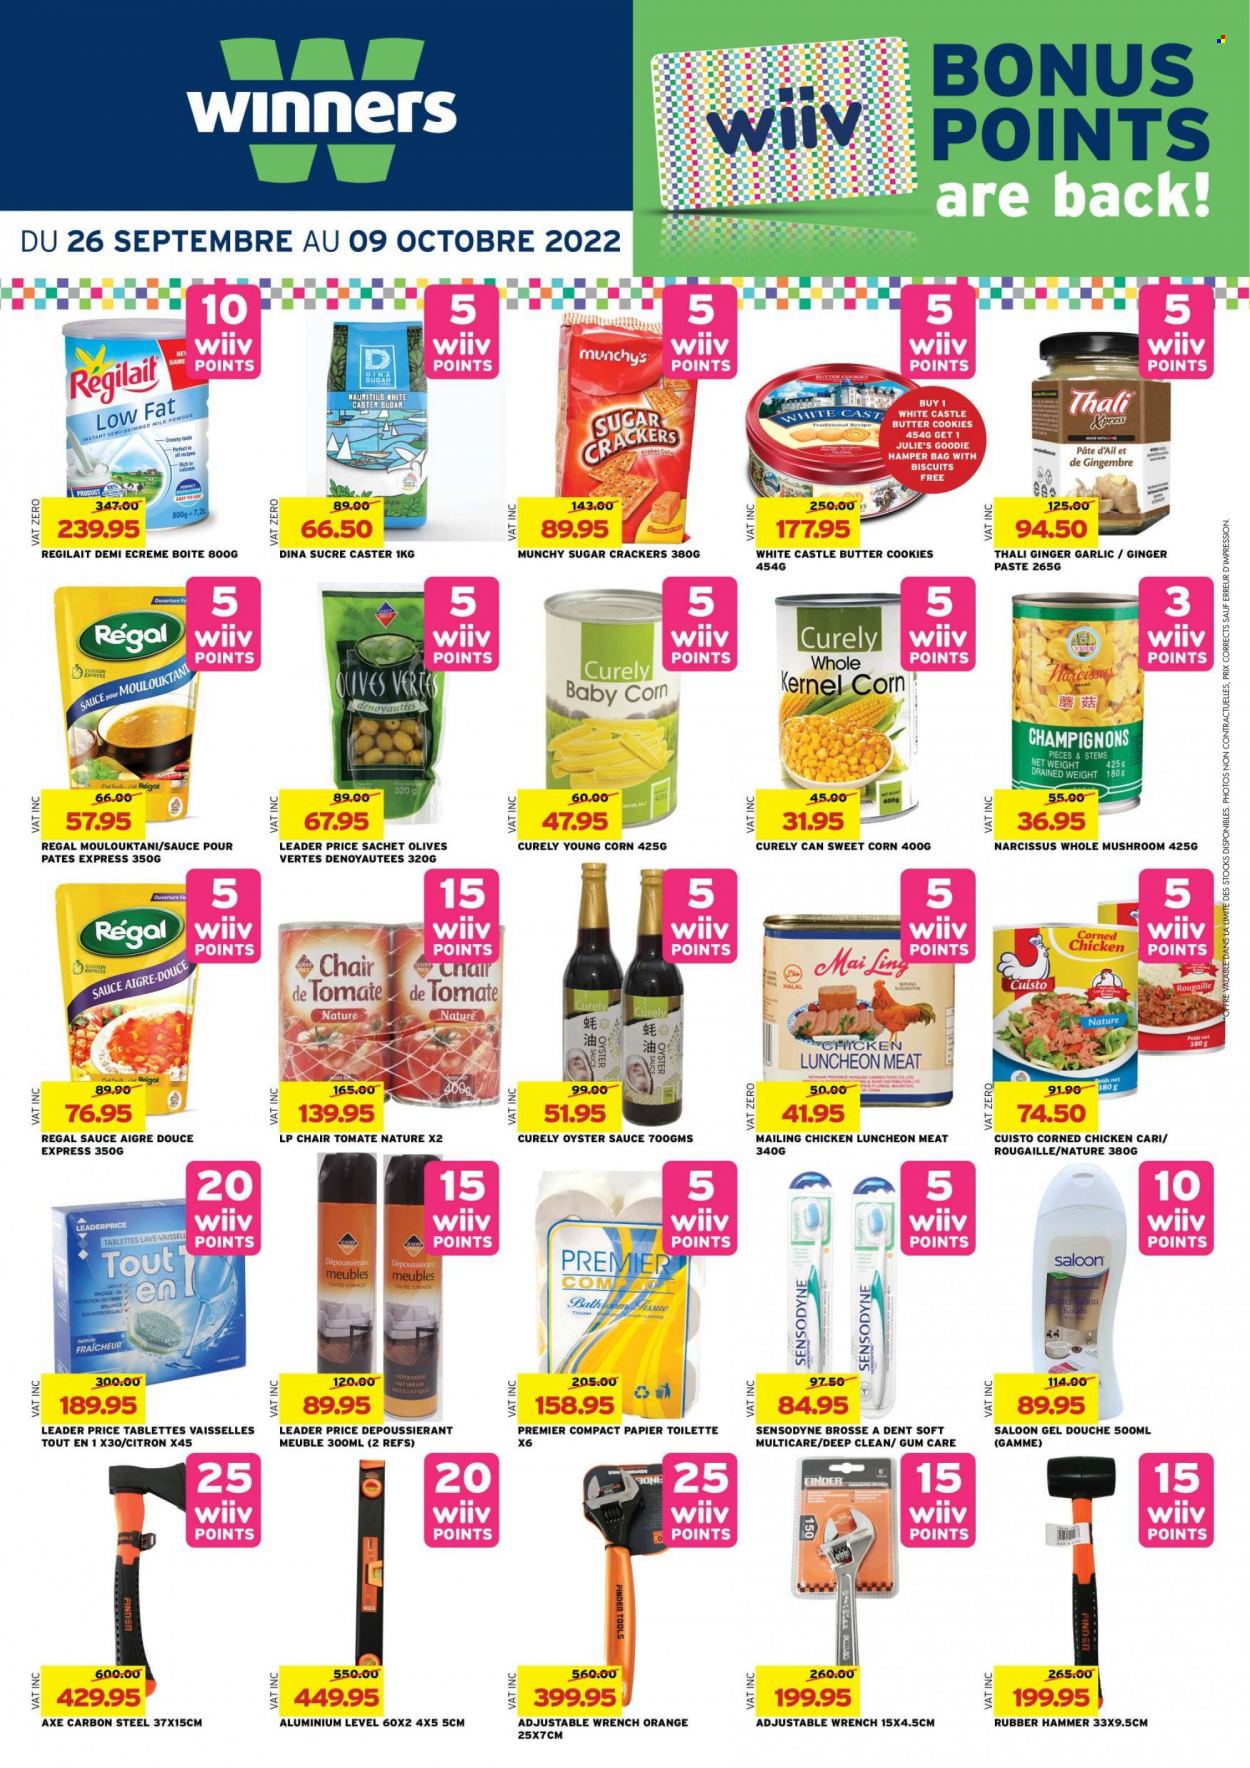 thumbnail - Winner's Catalogue - 26.09.2022 - 9.10.2022 - Sales products - mushrooms, corn, garlic, ginger, sweet corn, oranges, oysters, sauce, hamper, lunch meat, milk, milk powder, cookies, butter cookies, crackers, biscuit, Julie's, sugar, oyster sauce, Castle, Axe, bag, eraser, olives, Sensodyne. Page 25.